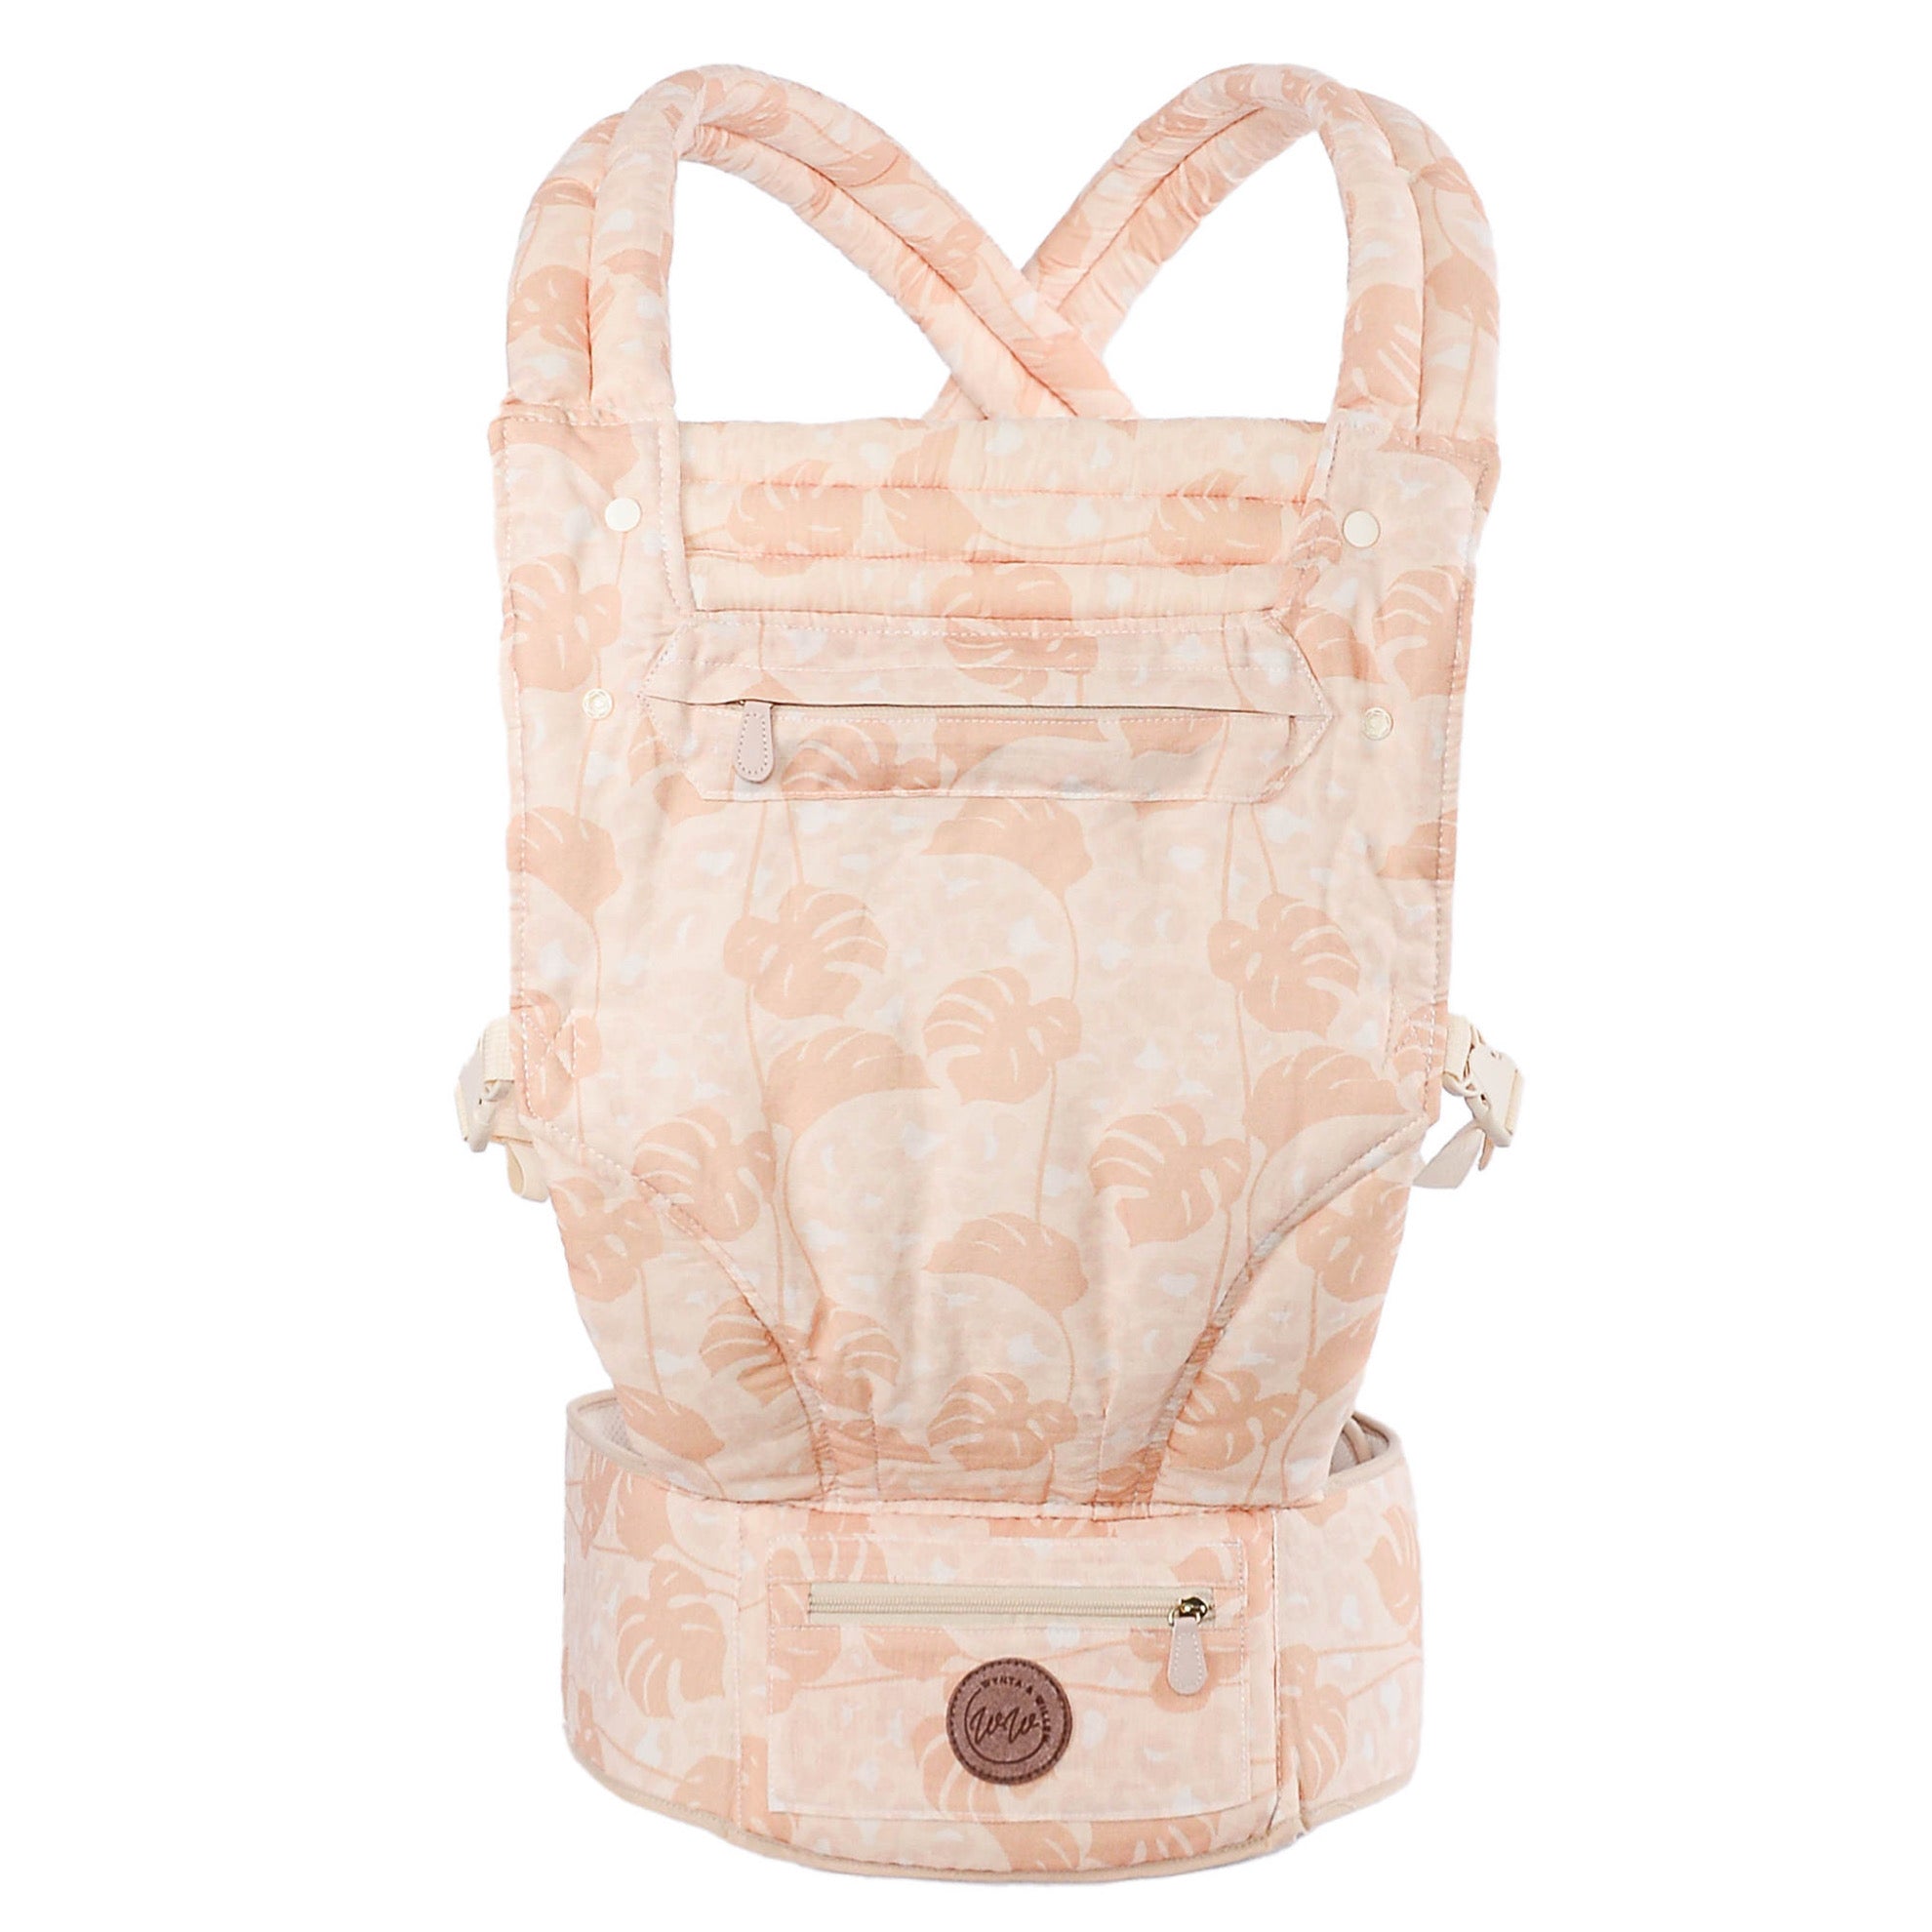 Le Palm II Baby Carrier